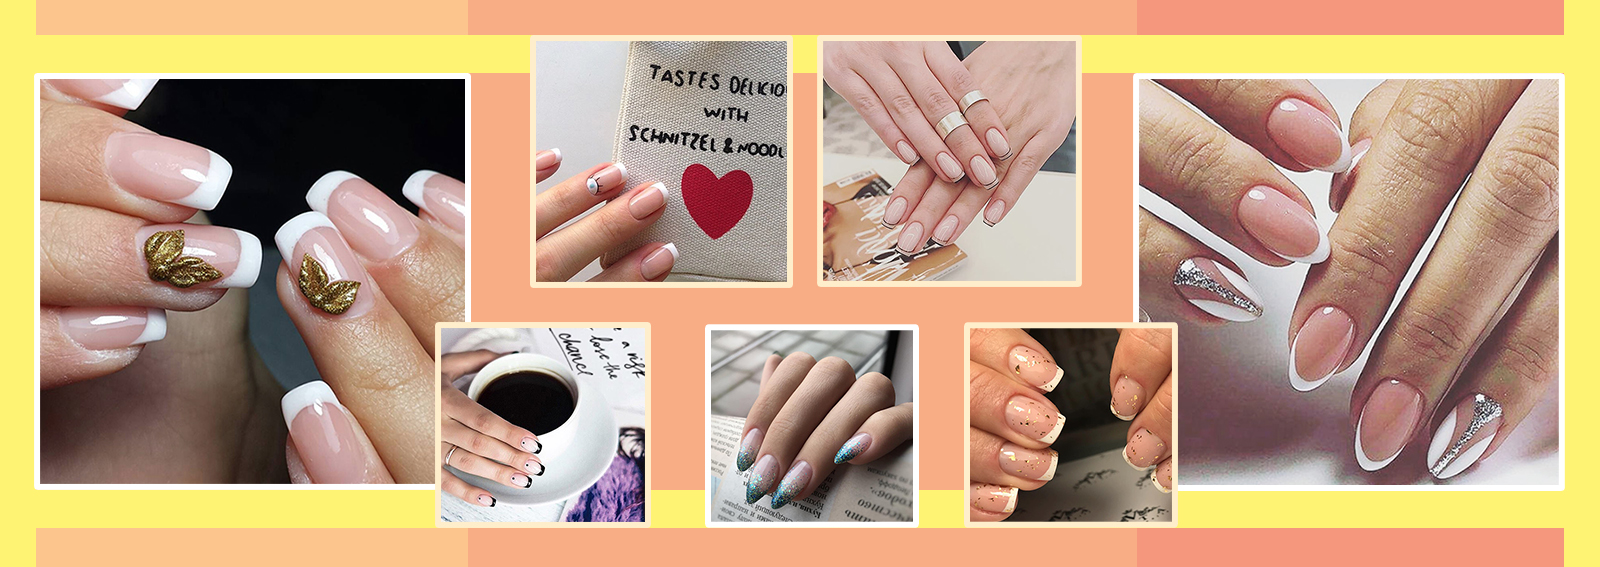 french manicure collage_desktop